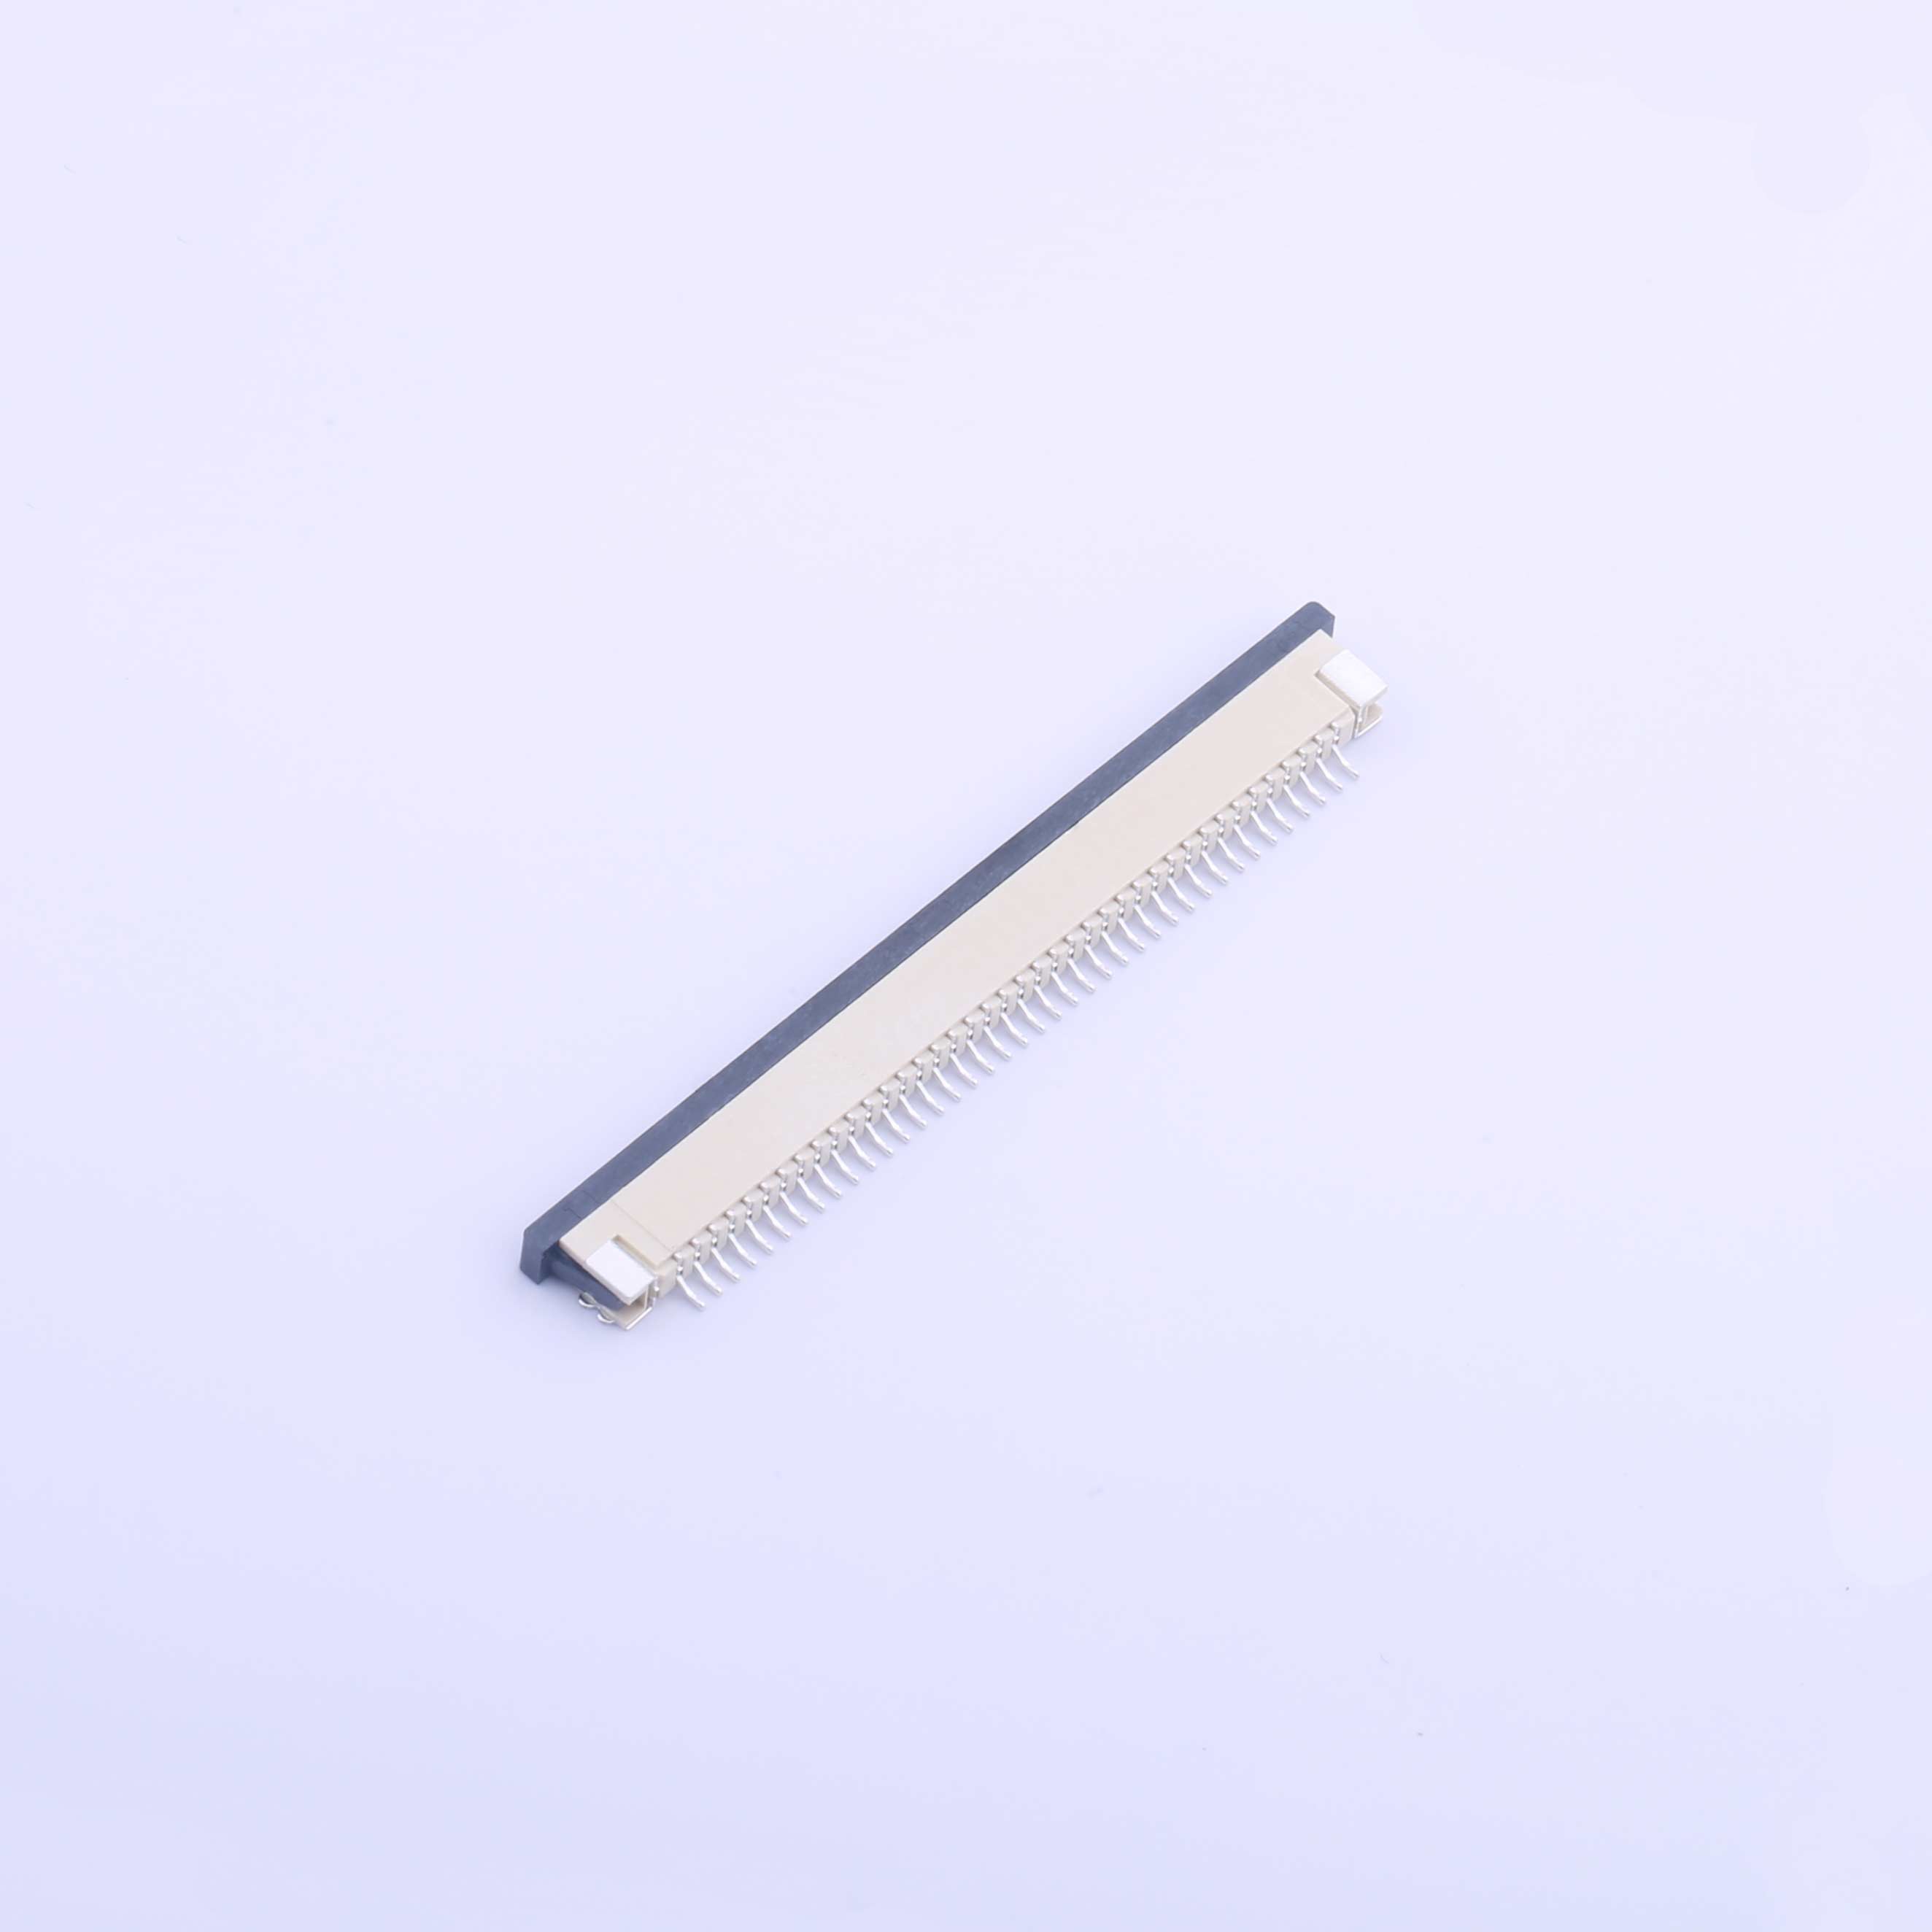 Kinghelm FFC/FPC Connector 40p Pitch 1mm - KH-CL1.0-H2.5-40pin